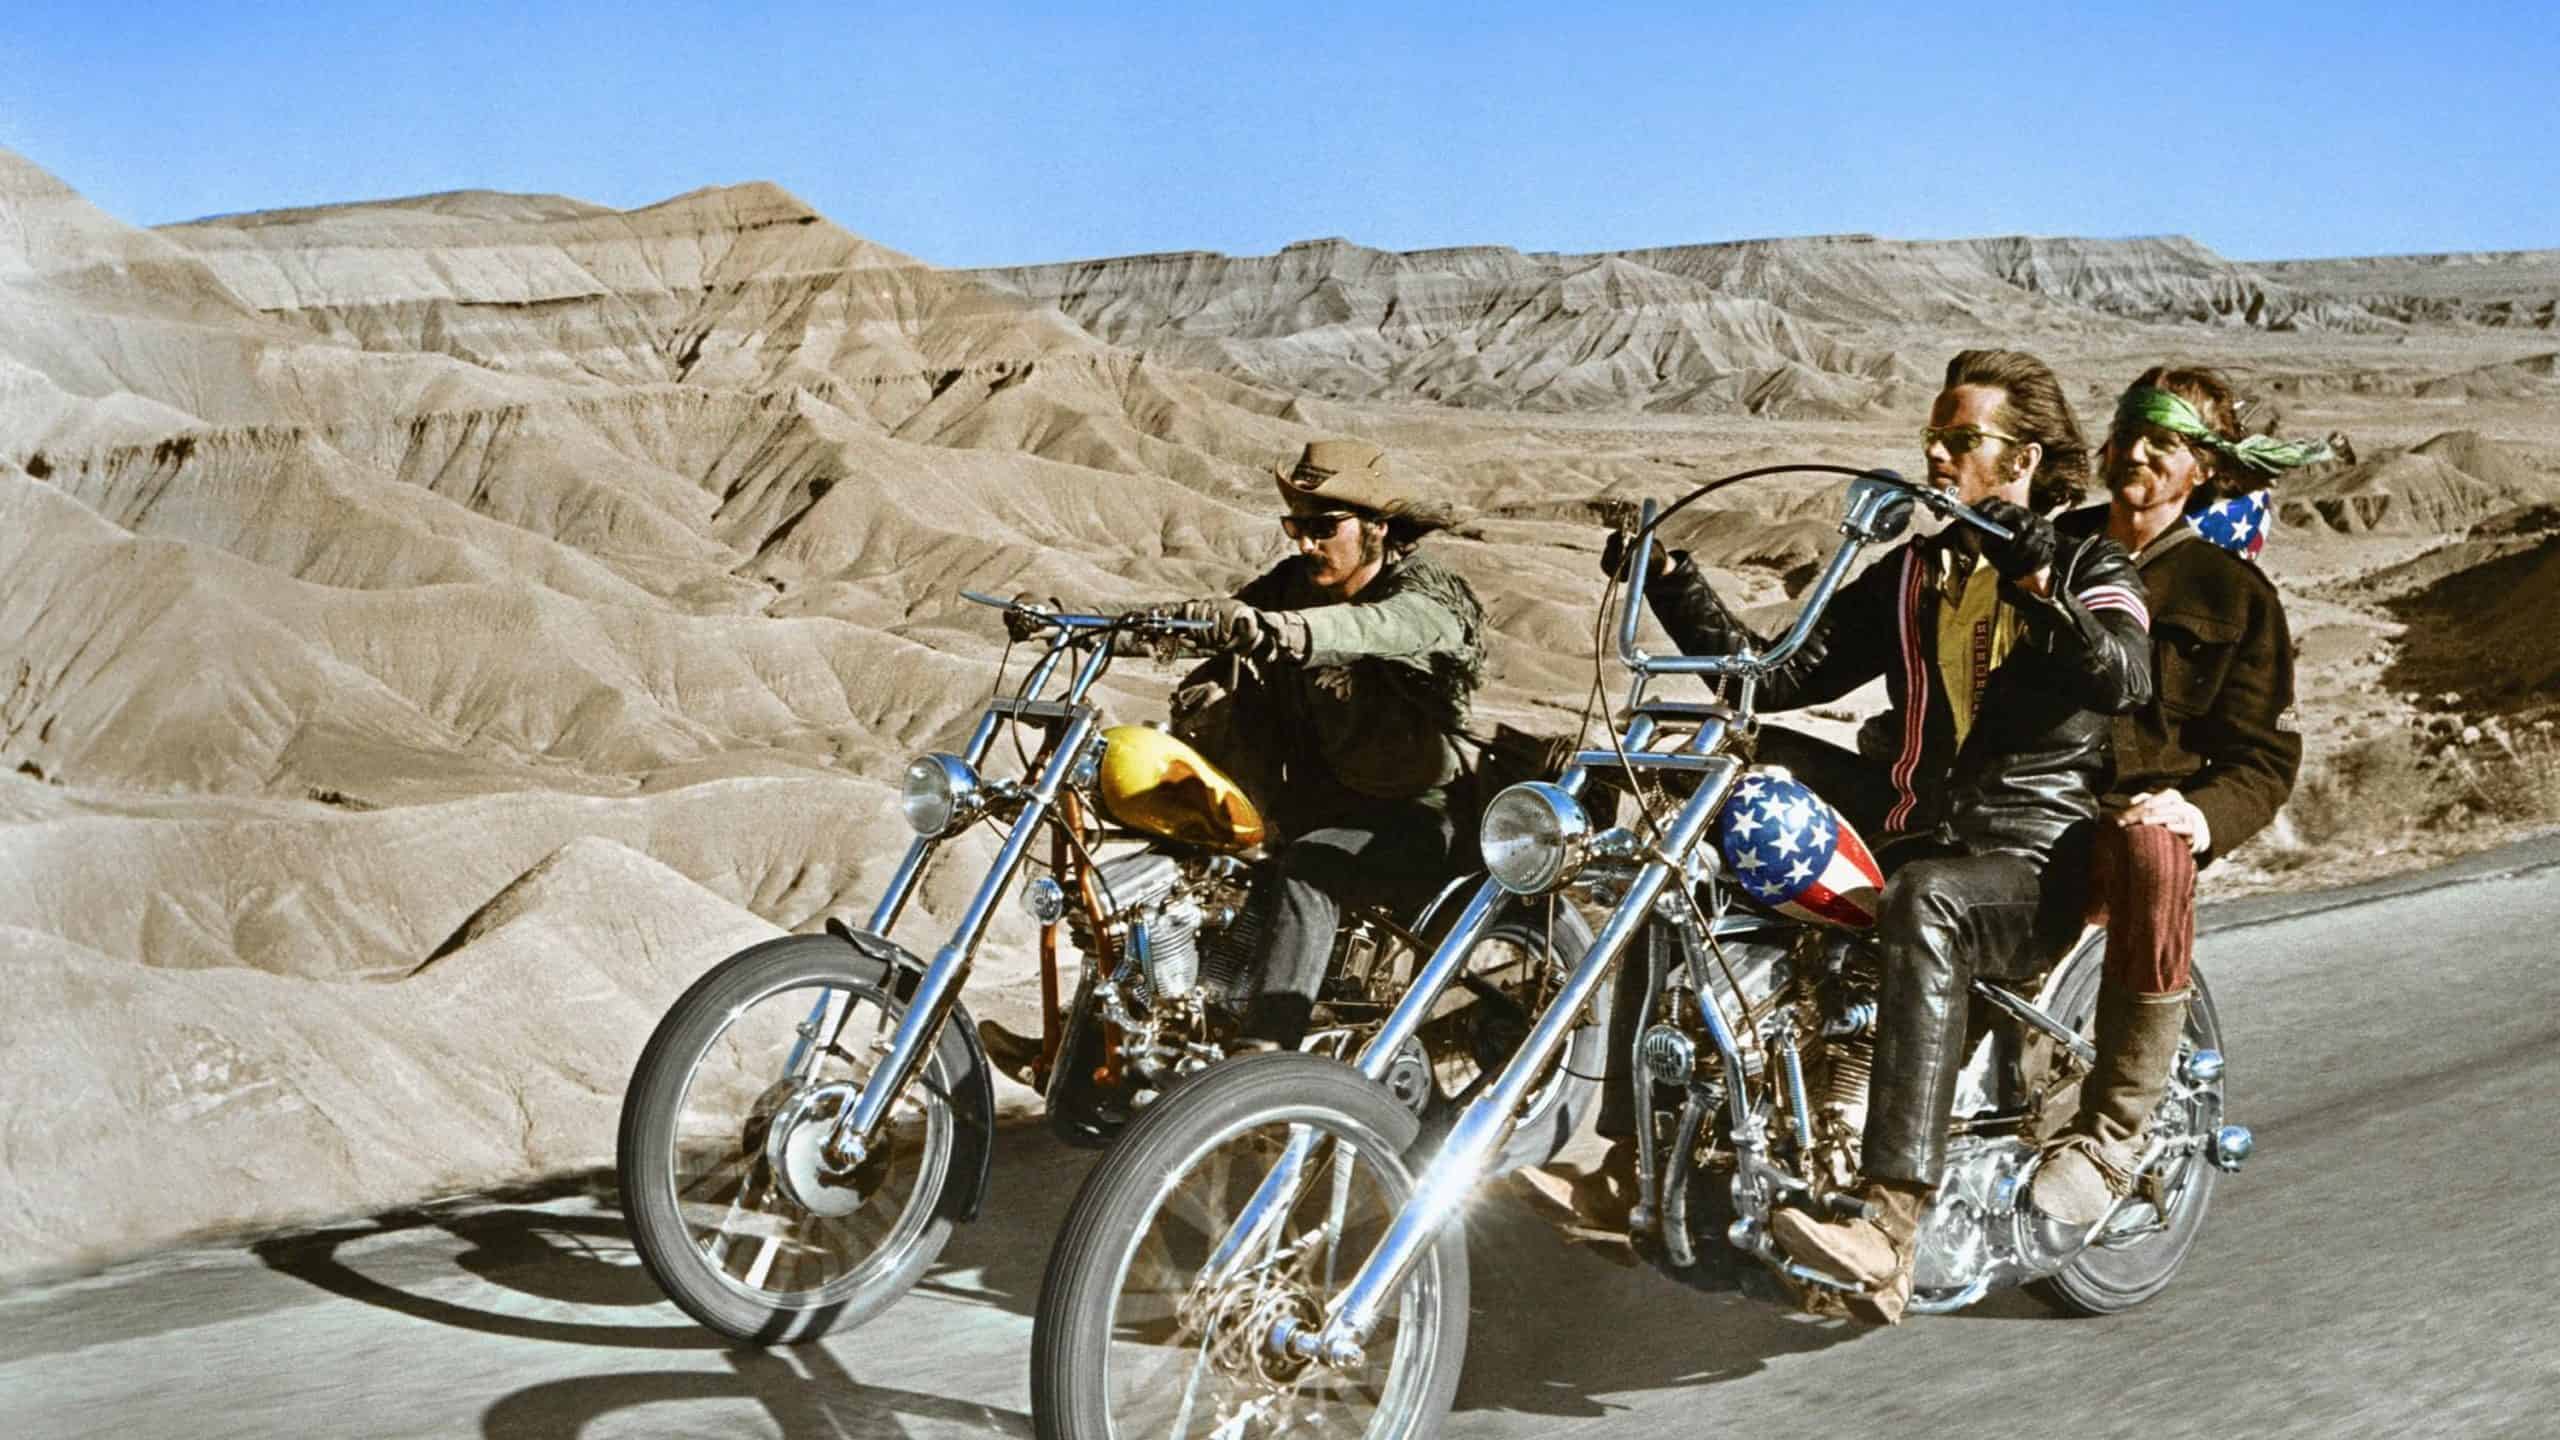 The Cast of the film, Easy Rider, shooting in California (Credits: Columbia Pictures)